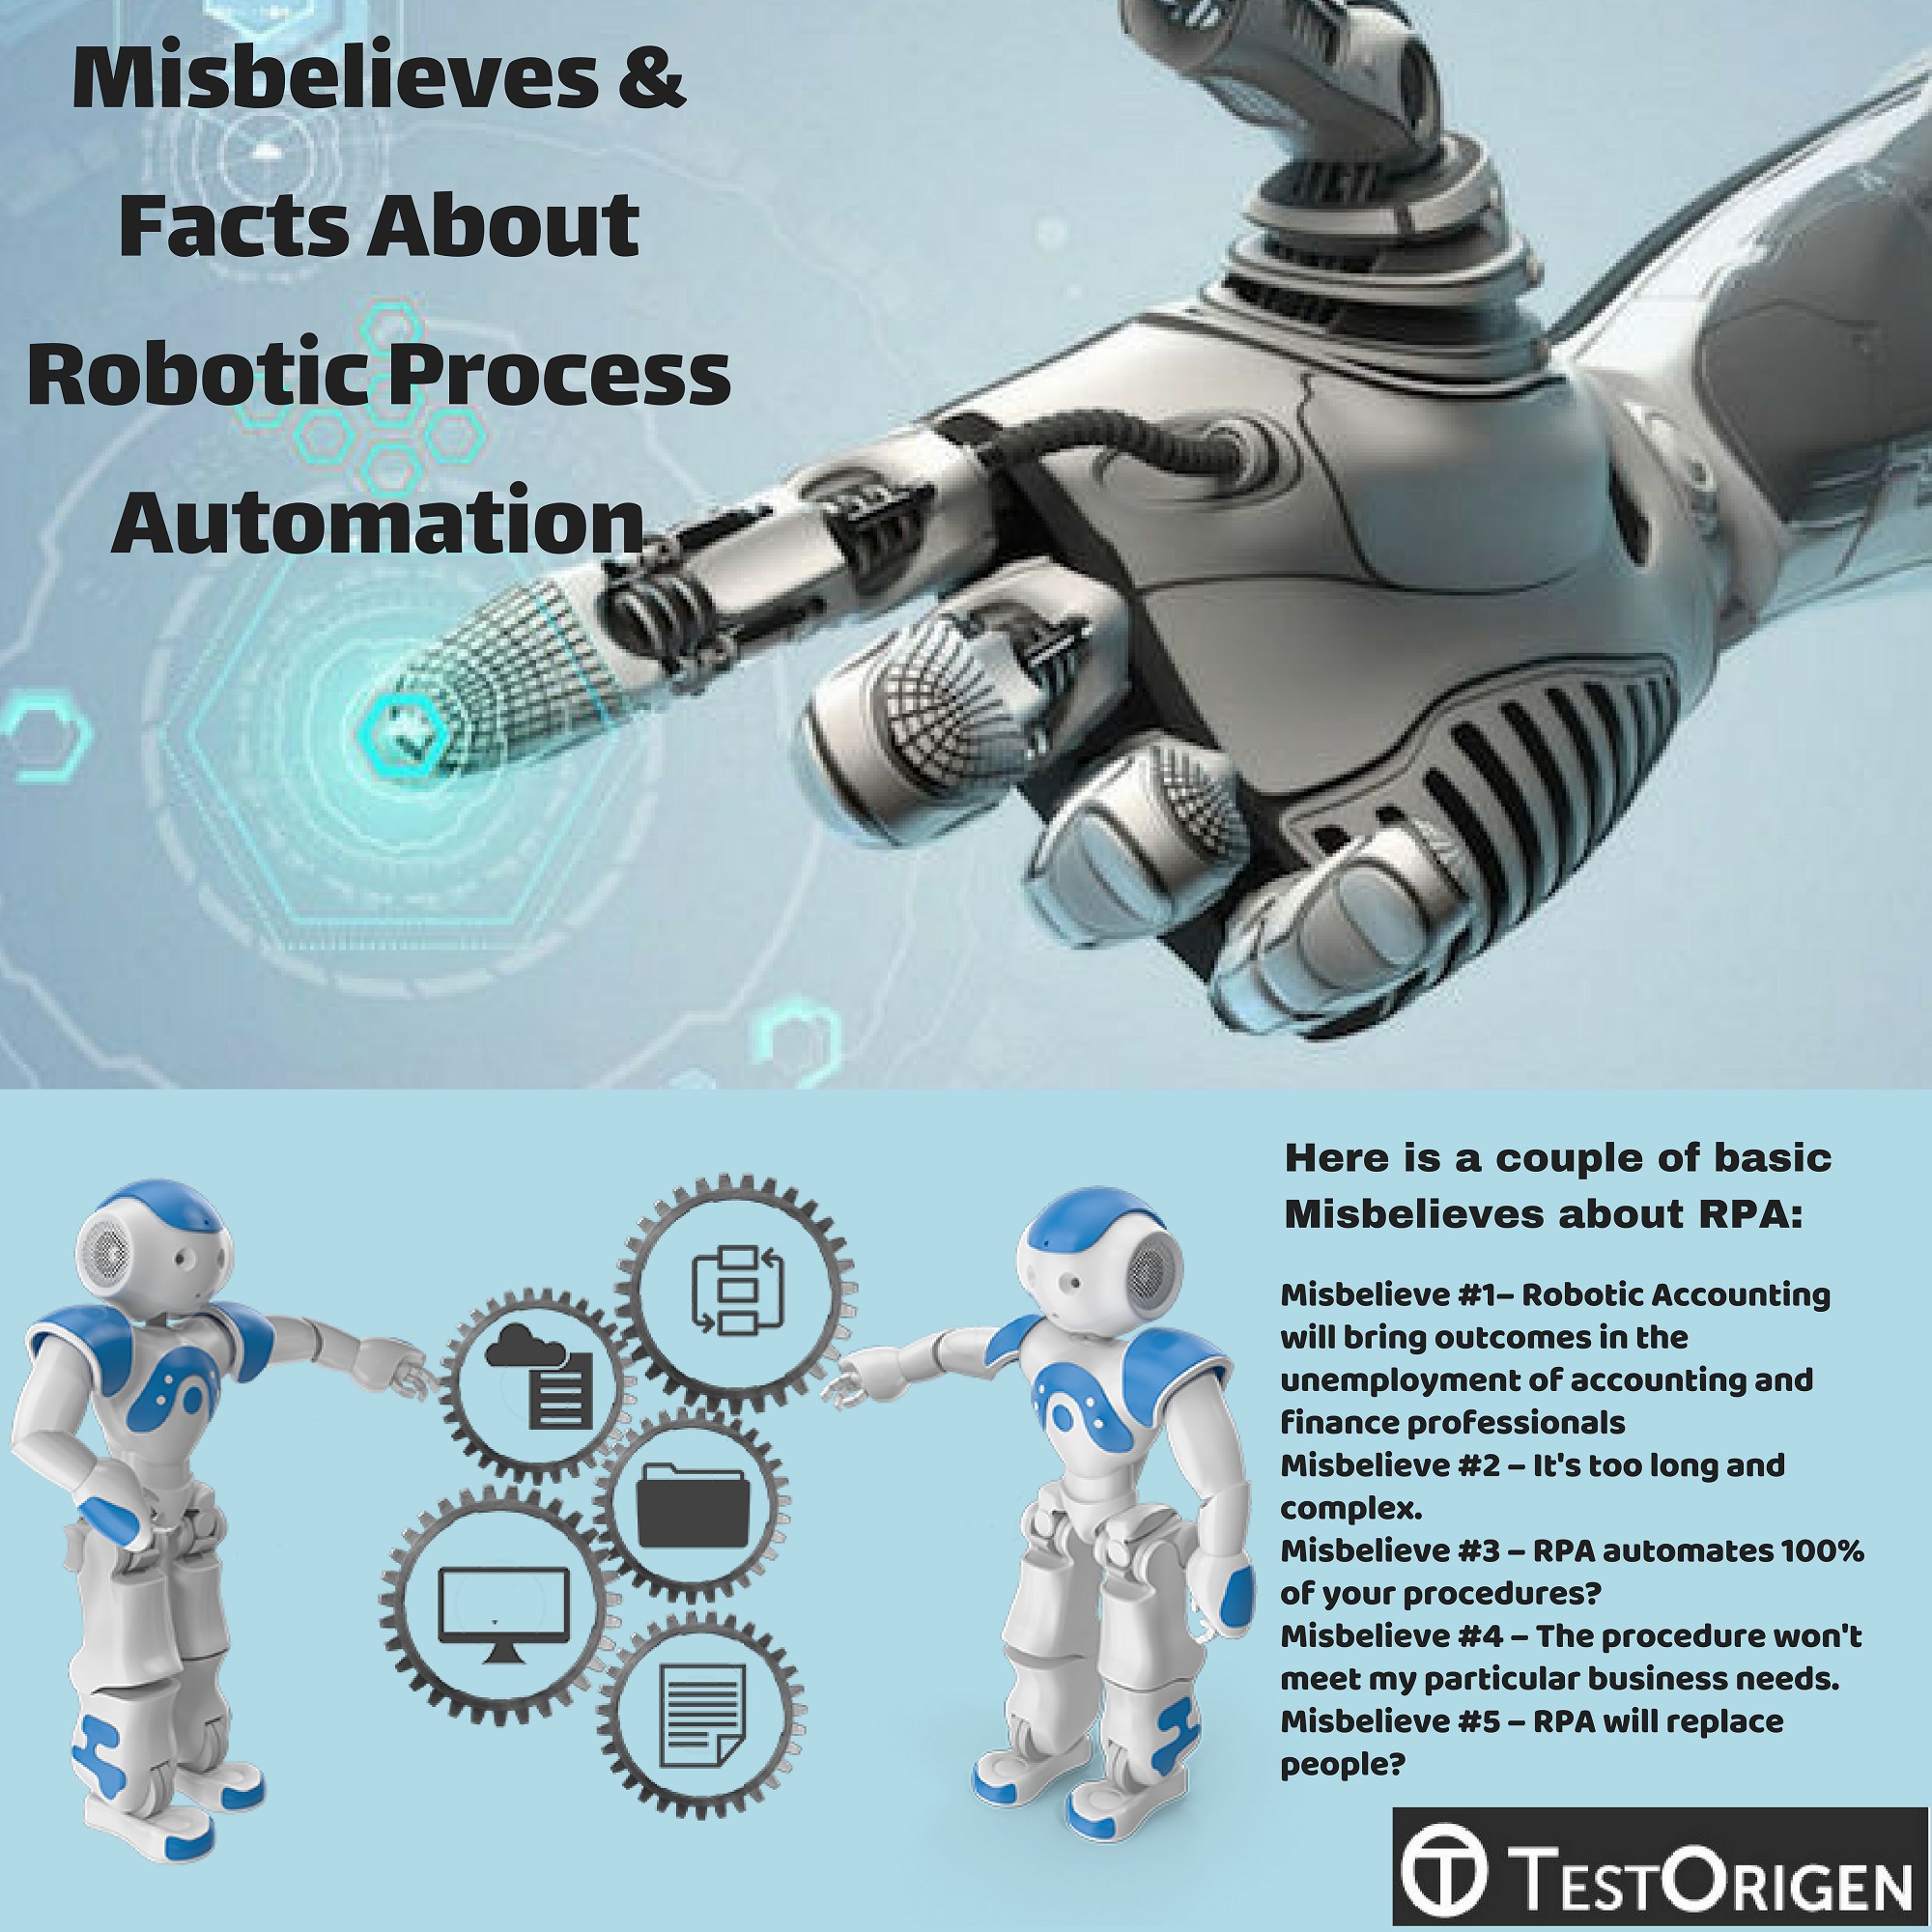 Misbelieves & Facts About Robotic Process Automation